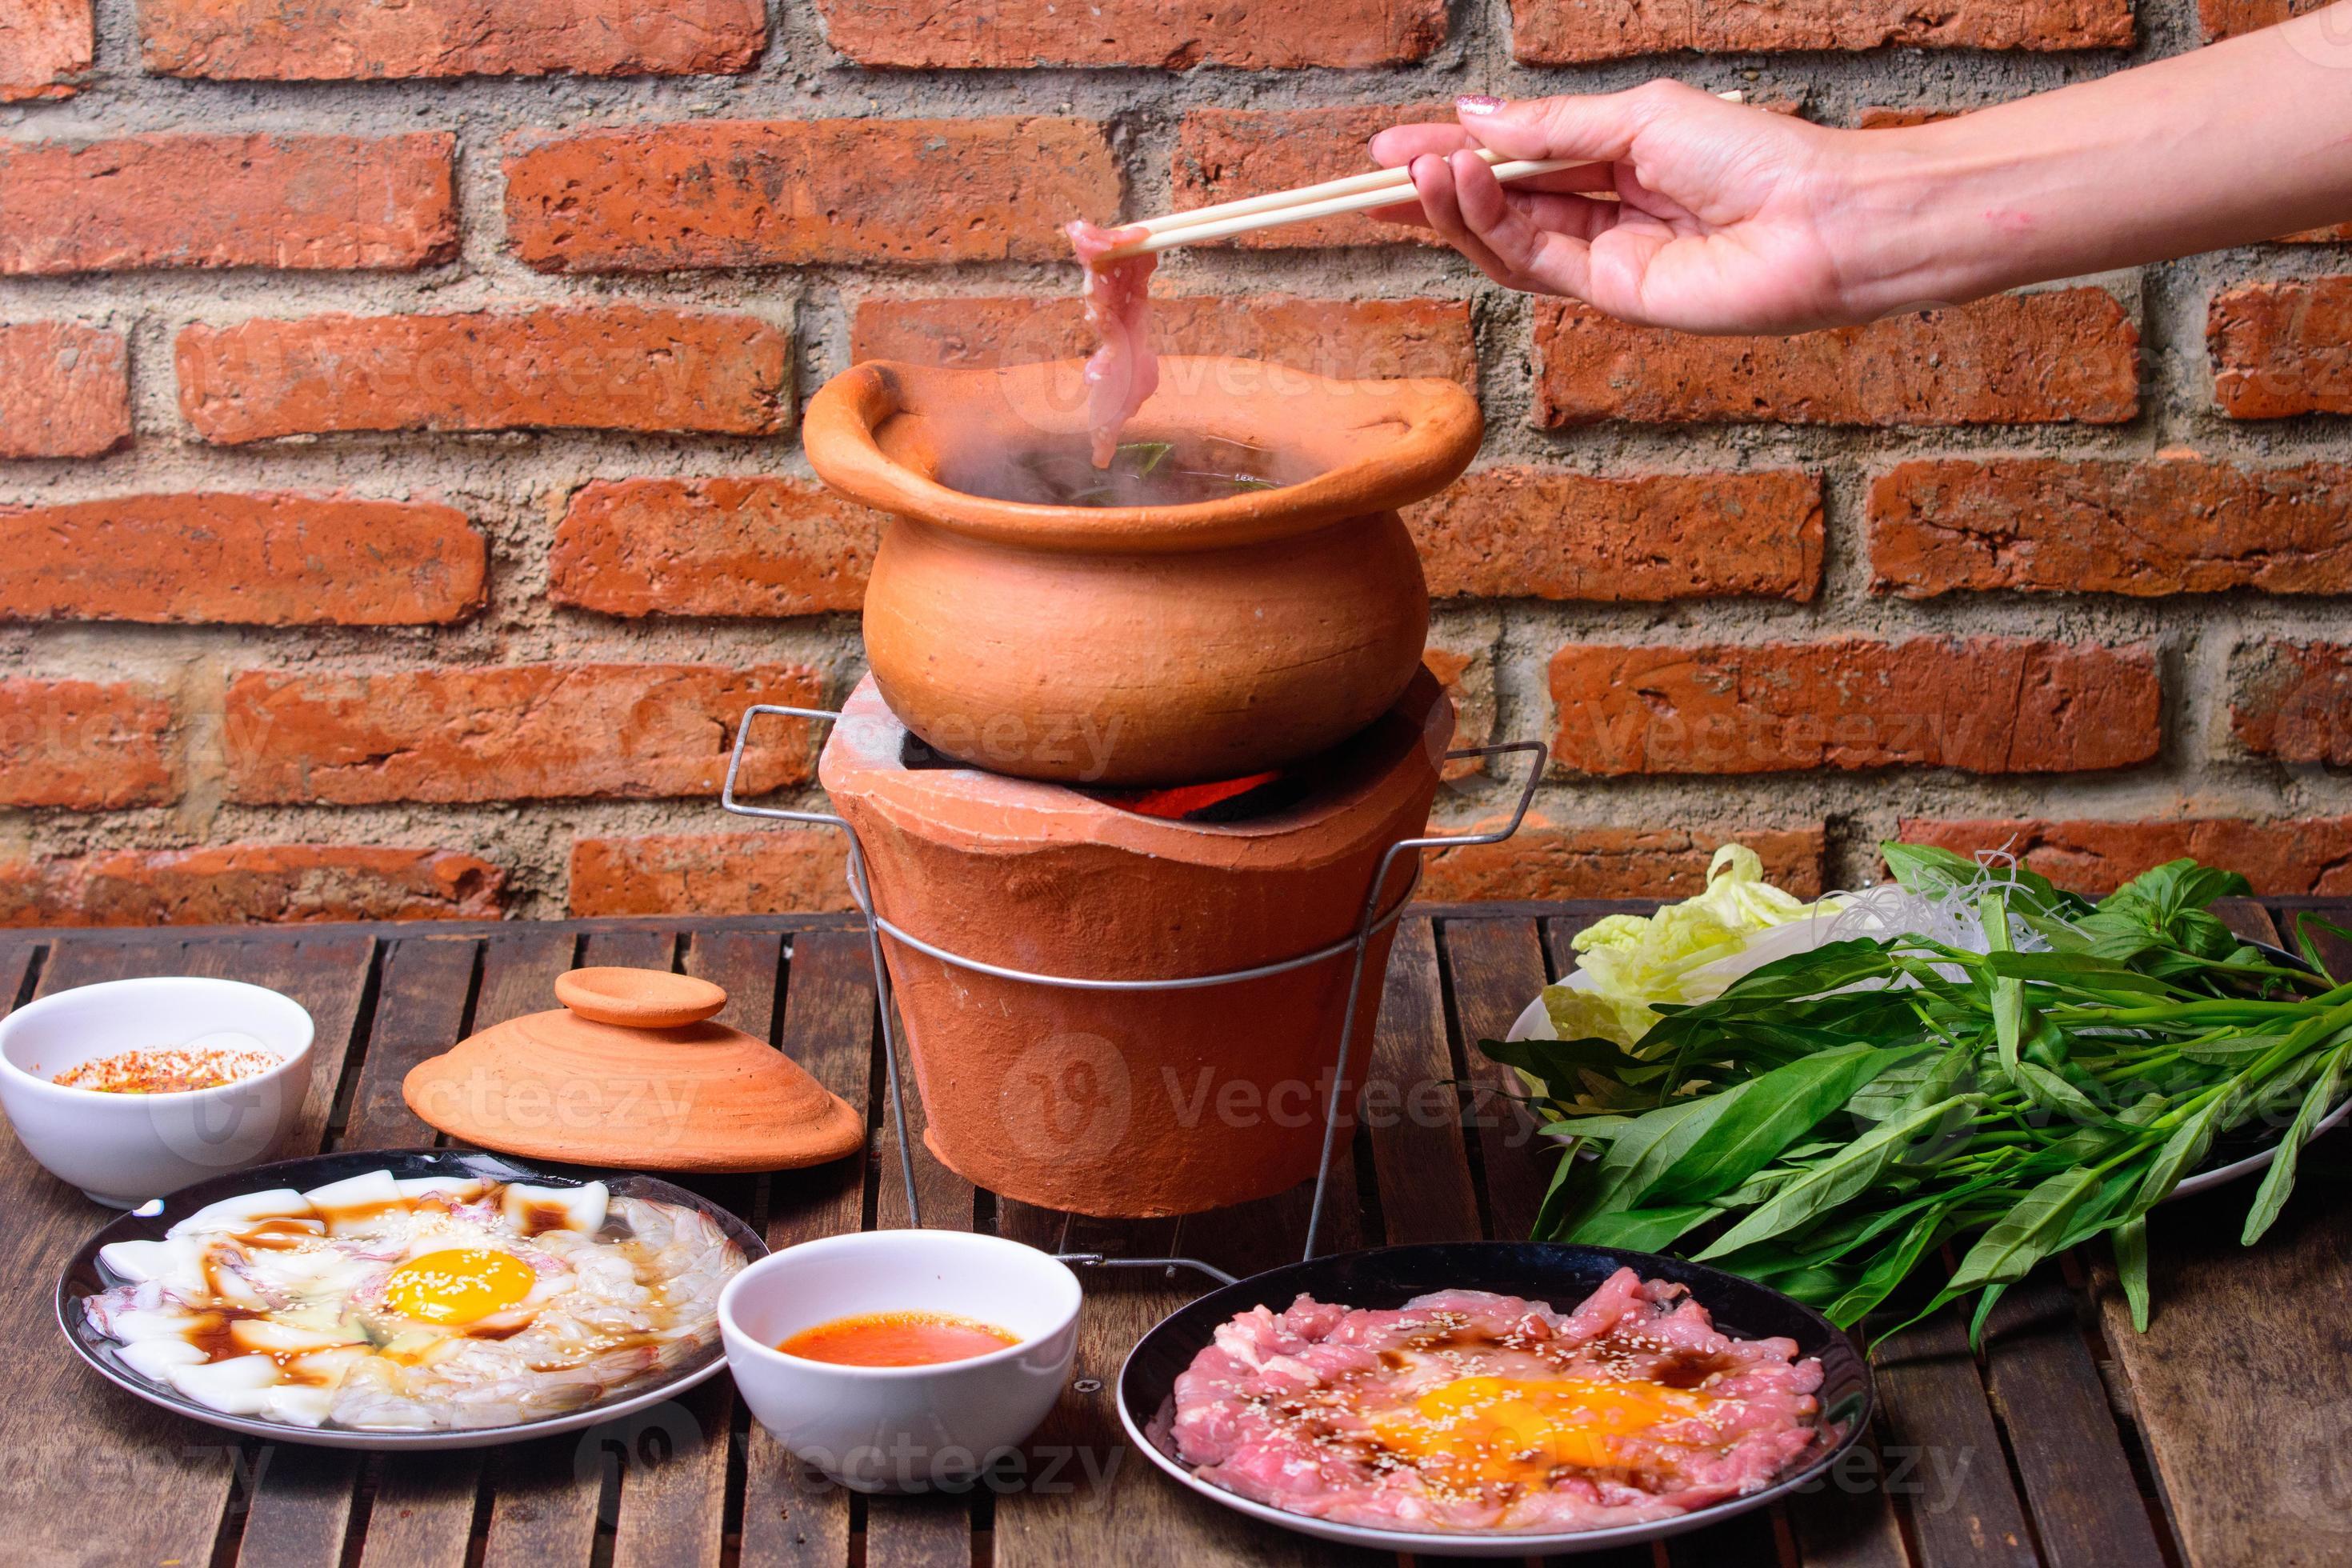 https://static.vecteezy.com/system/resources/previews/020/173/071/large_2x/hot-pot-thai-style-hot-pot-with-clear-soup-in-the-clay-cooking-pot-photo.jpg